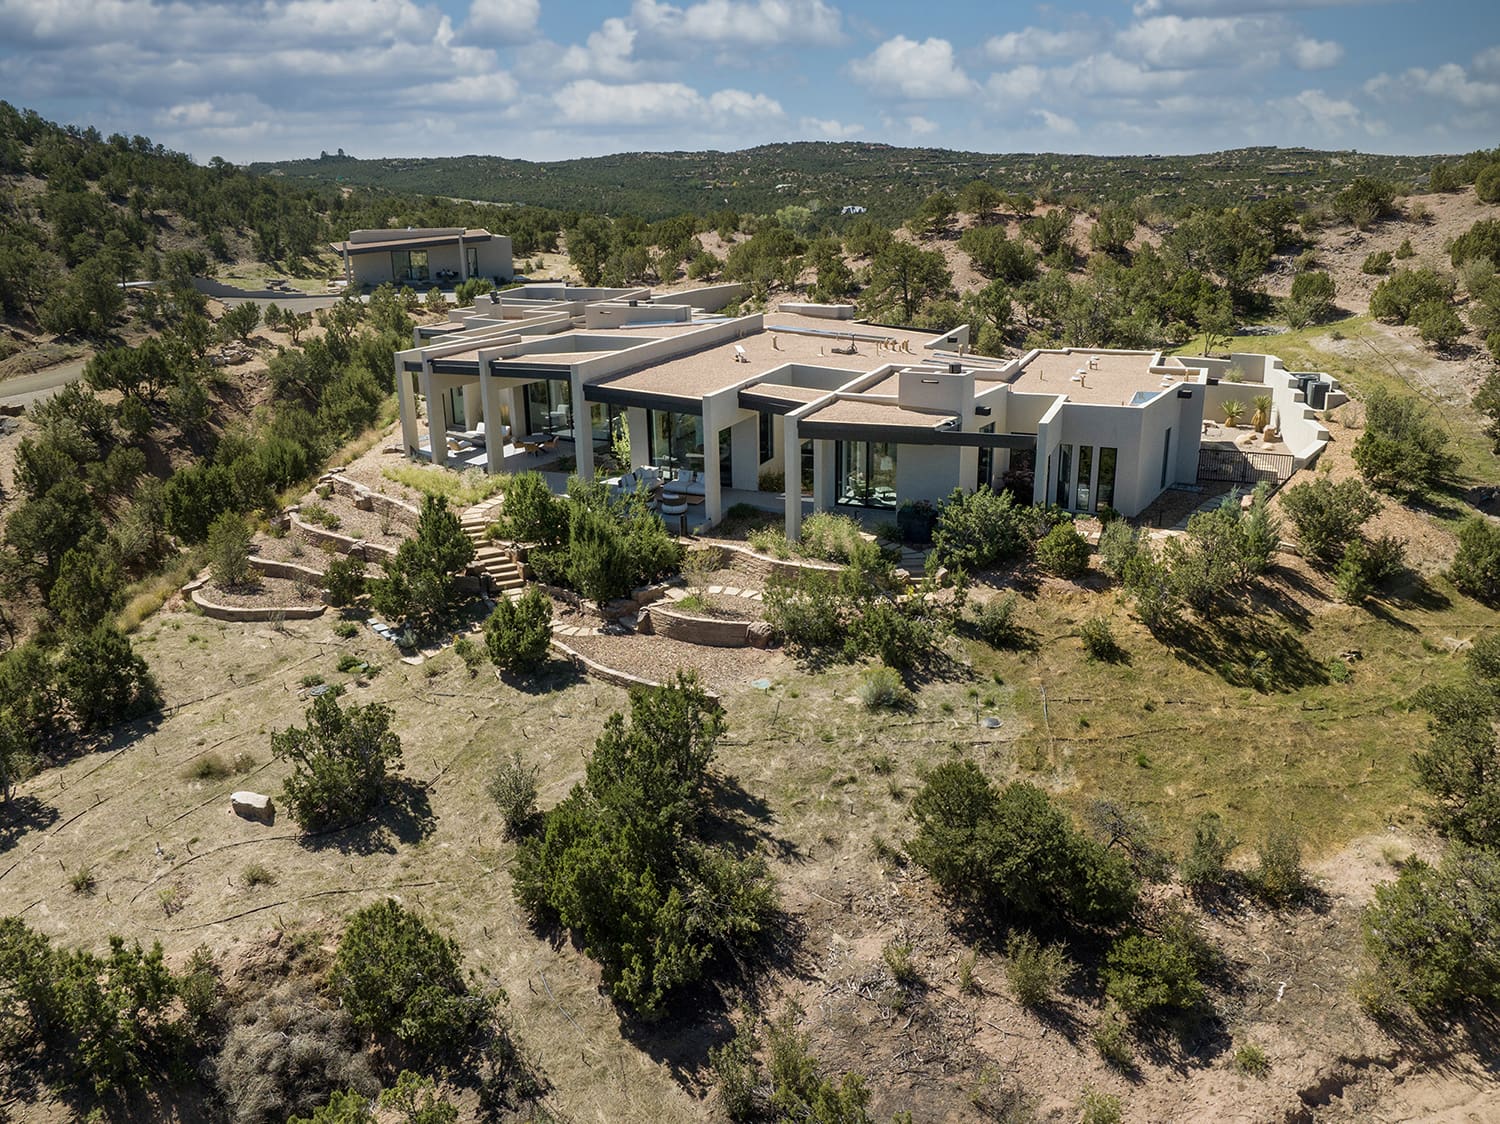 Overhead view of home and studio at tesuque ridge